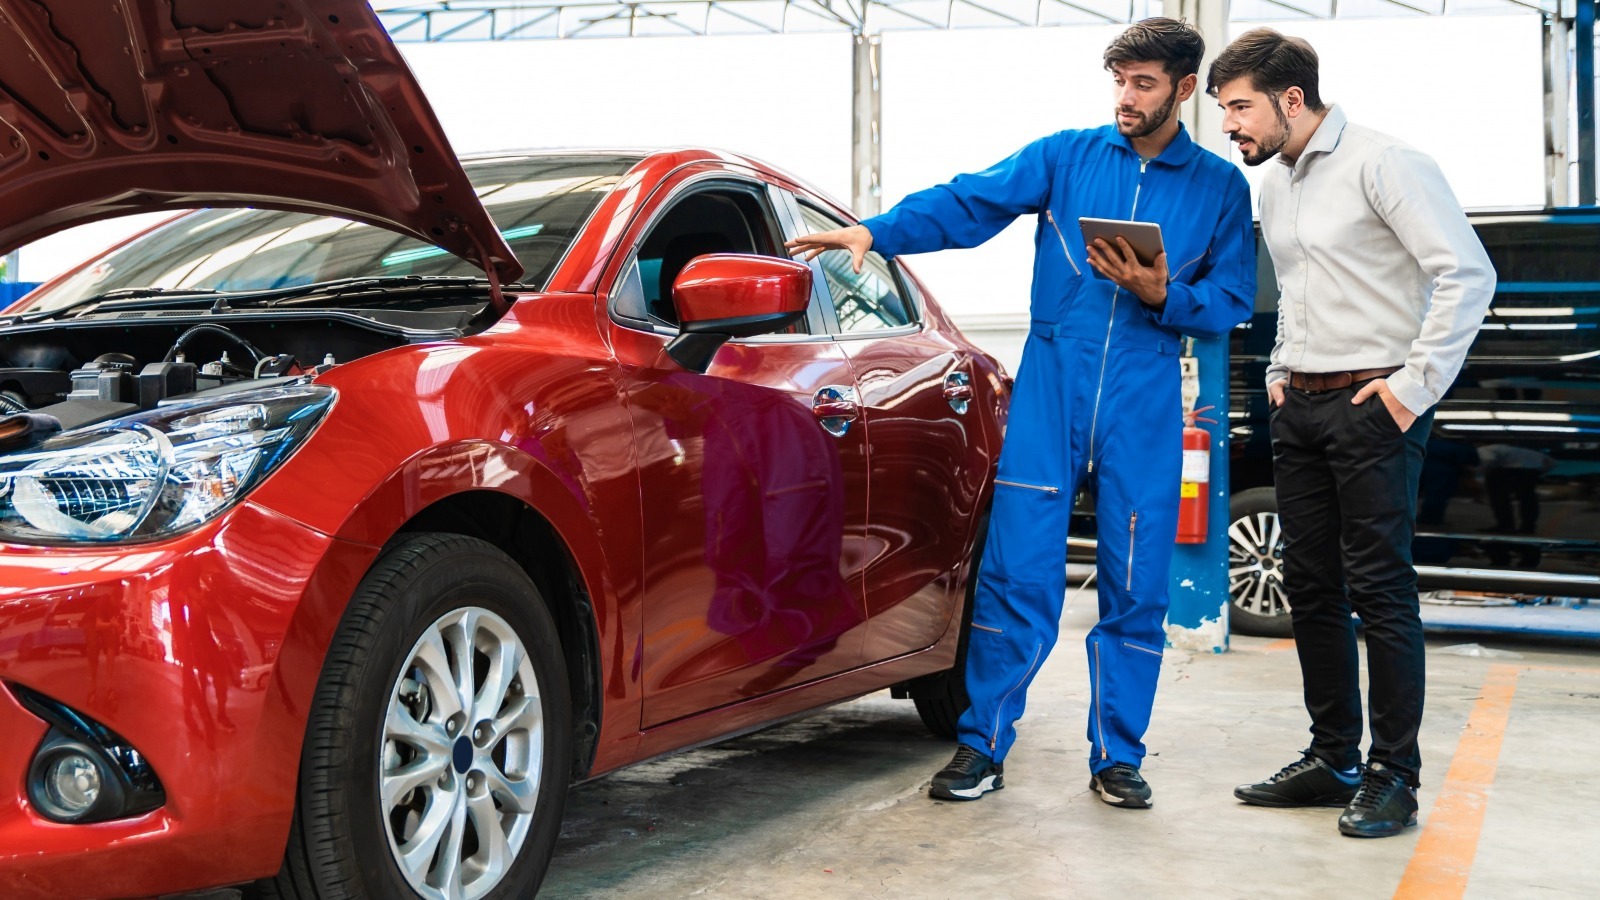 Are New Cars Too High Tech? Auto Repair Shops Say Yes